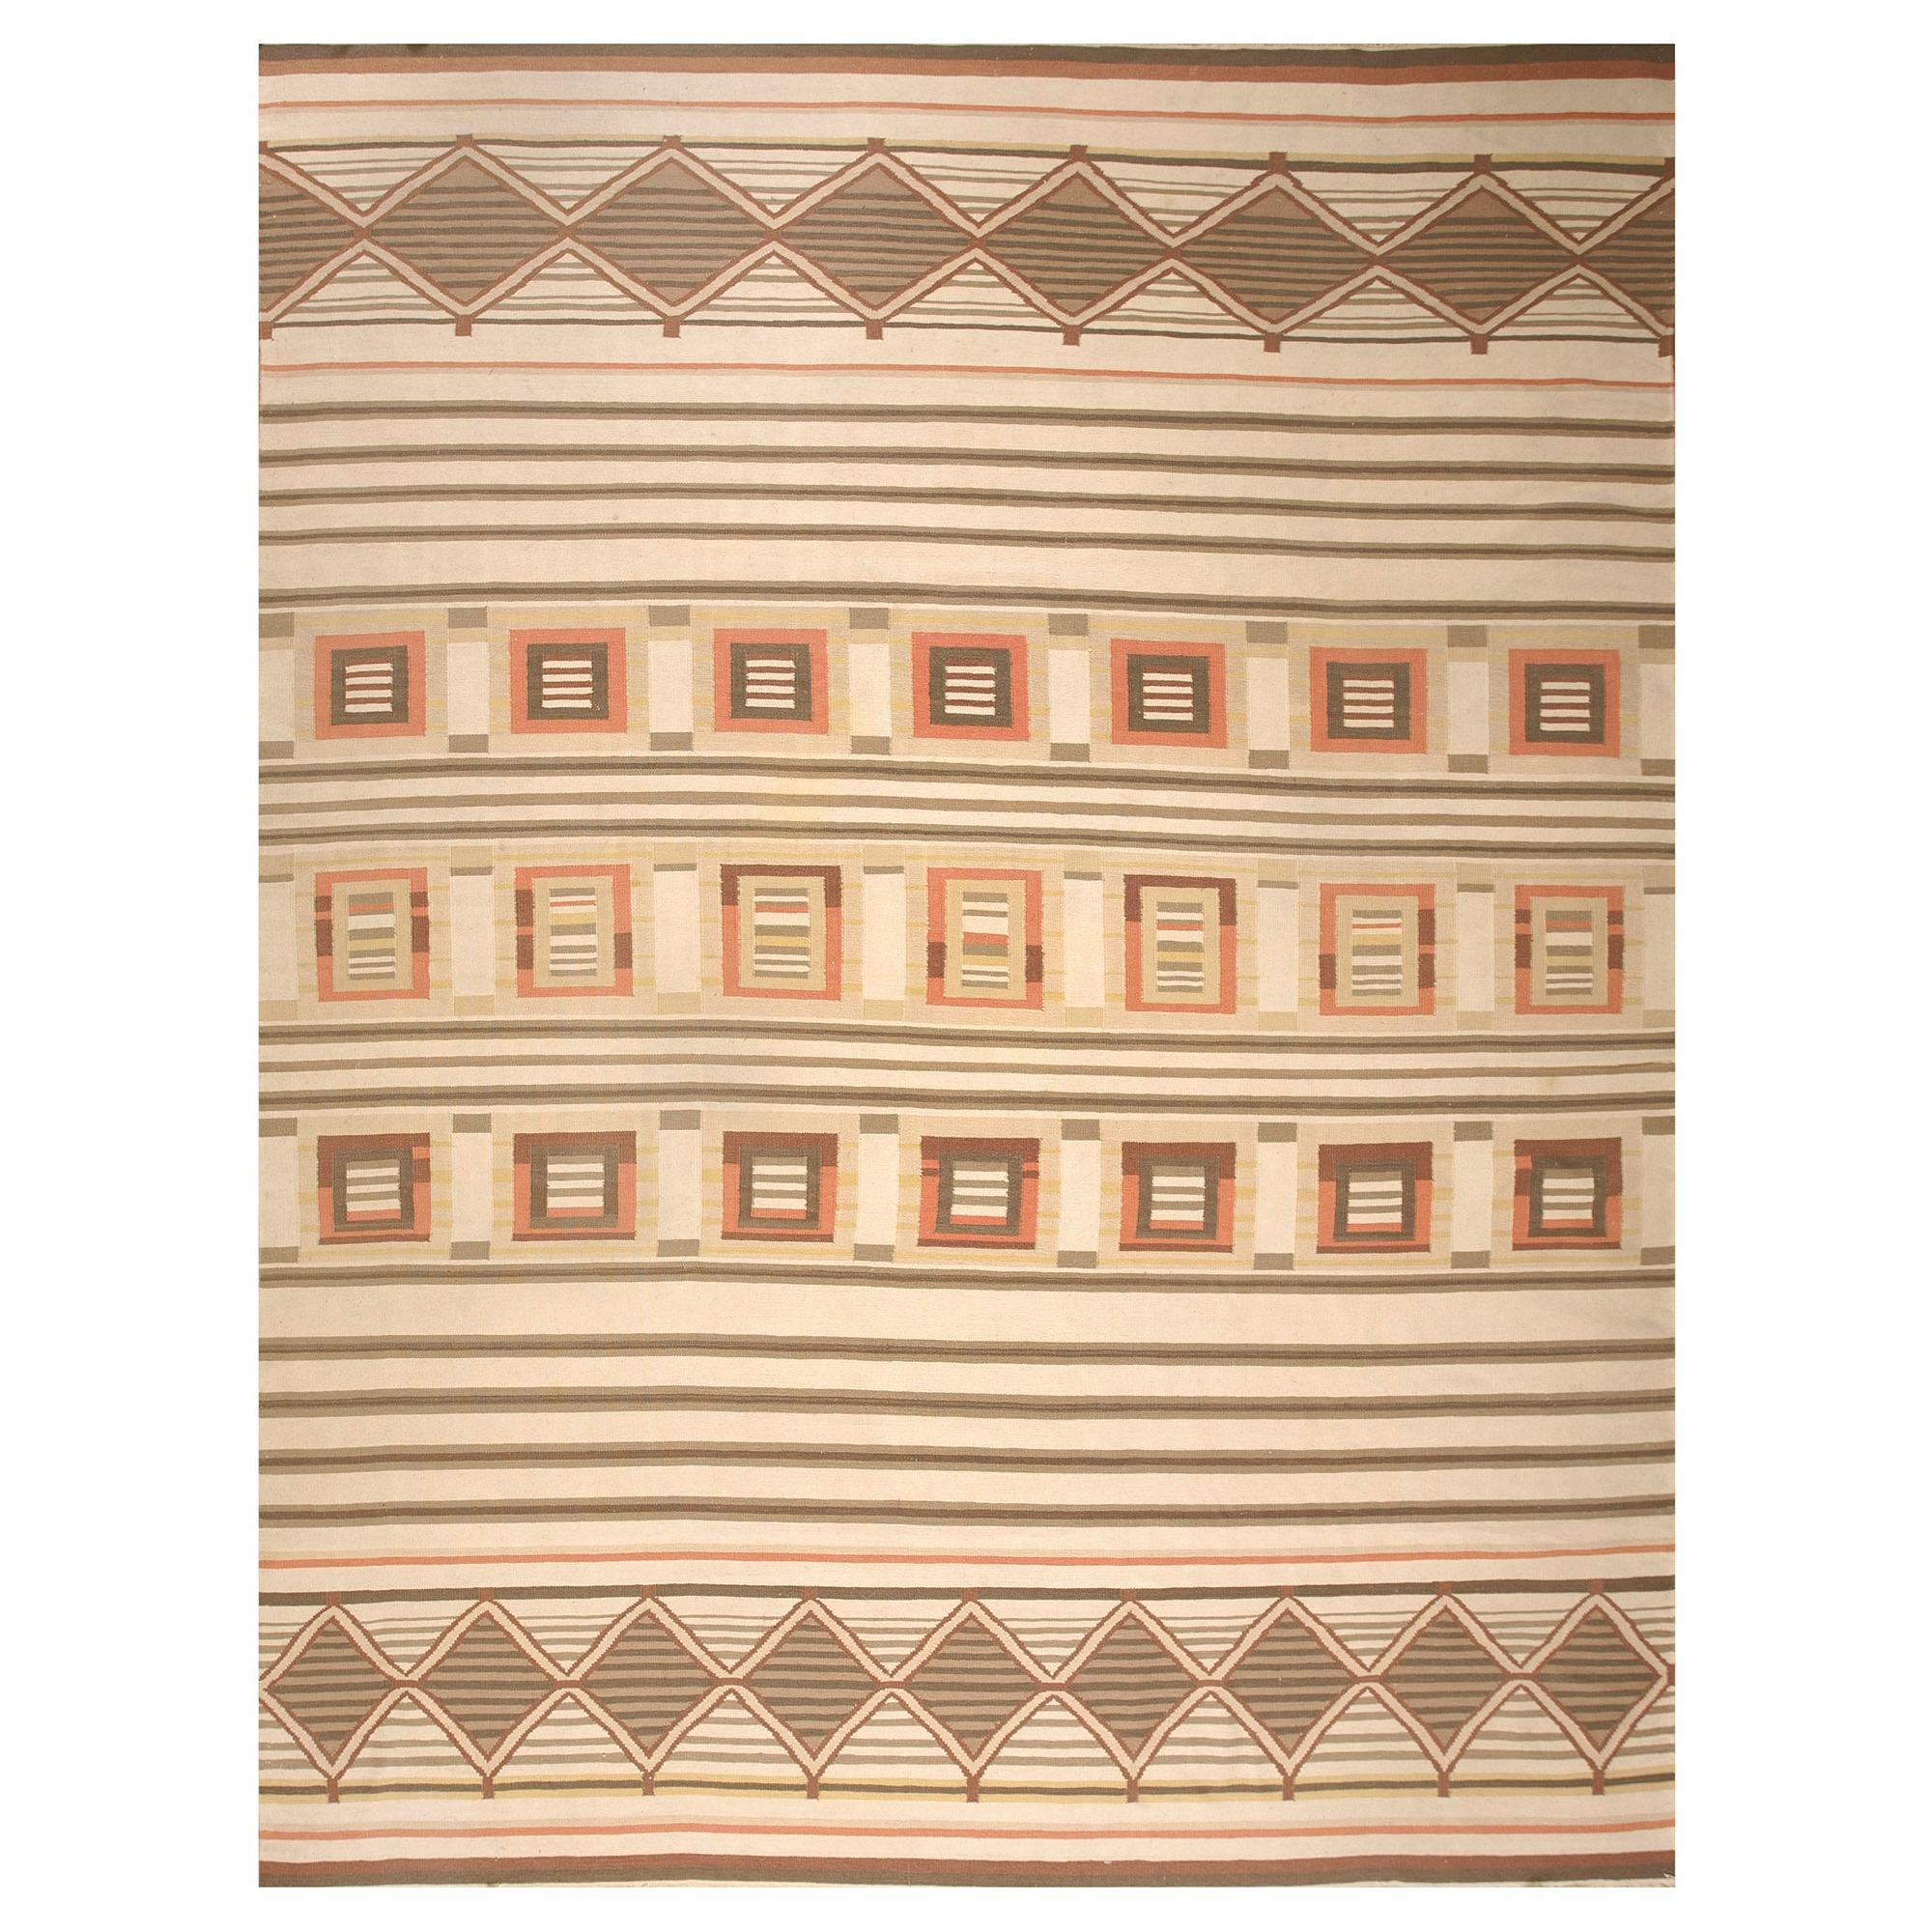 Mid 20th Century Indian Dhurrie Carpet ( 9' x 11'8" - 275 x 355 ) For Sale